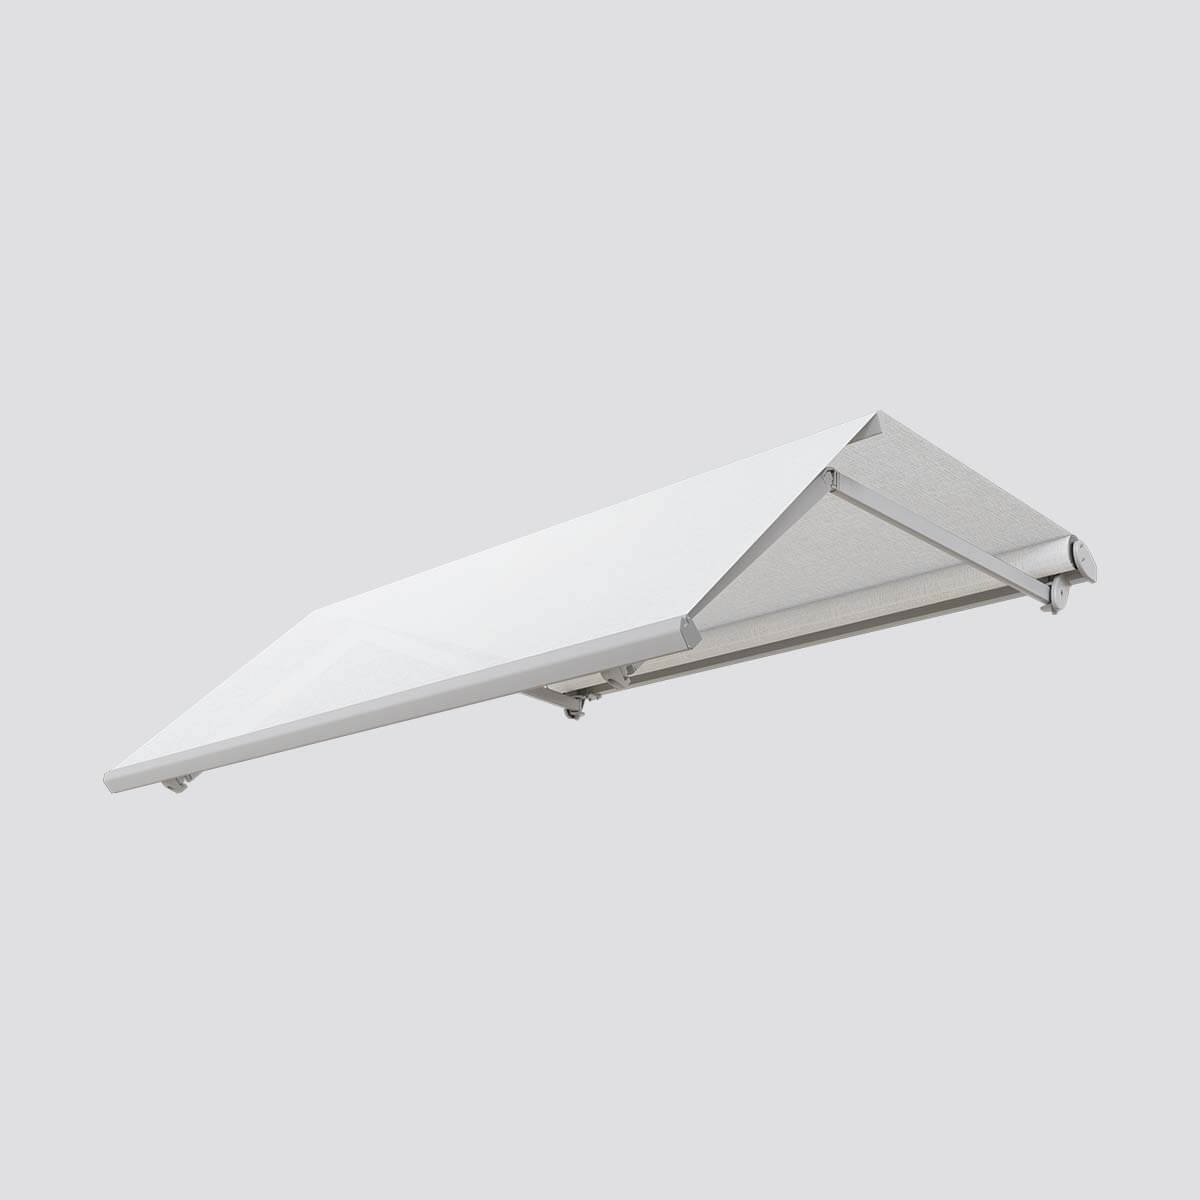 Motor-operated arm awning, Biqu 40, Exposed roller tube. Pronema